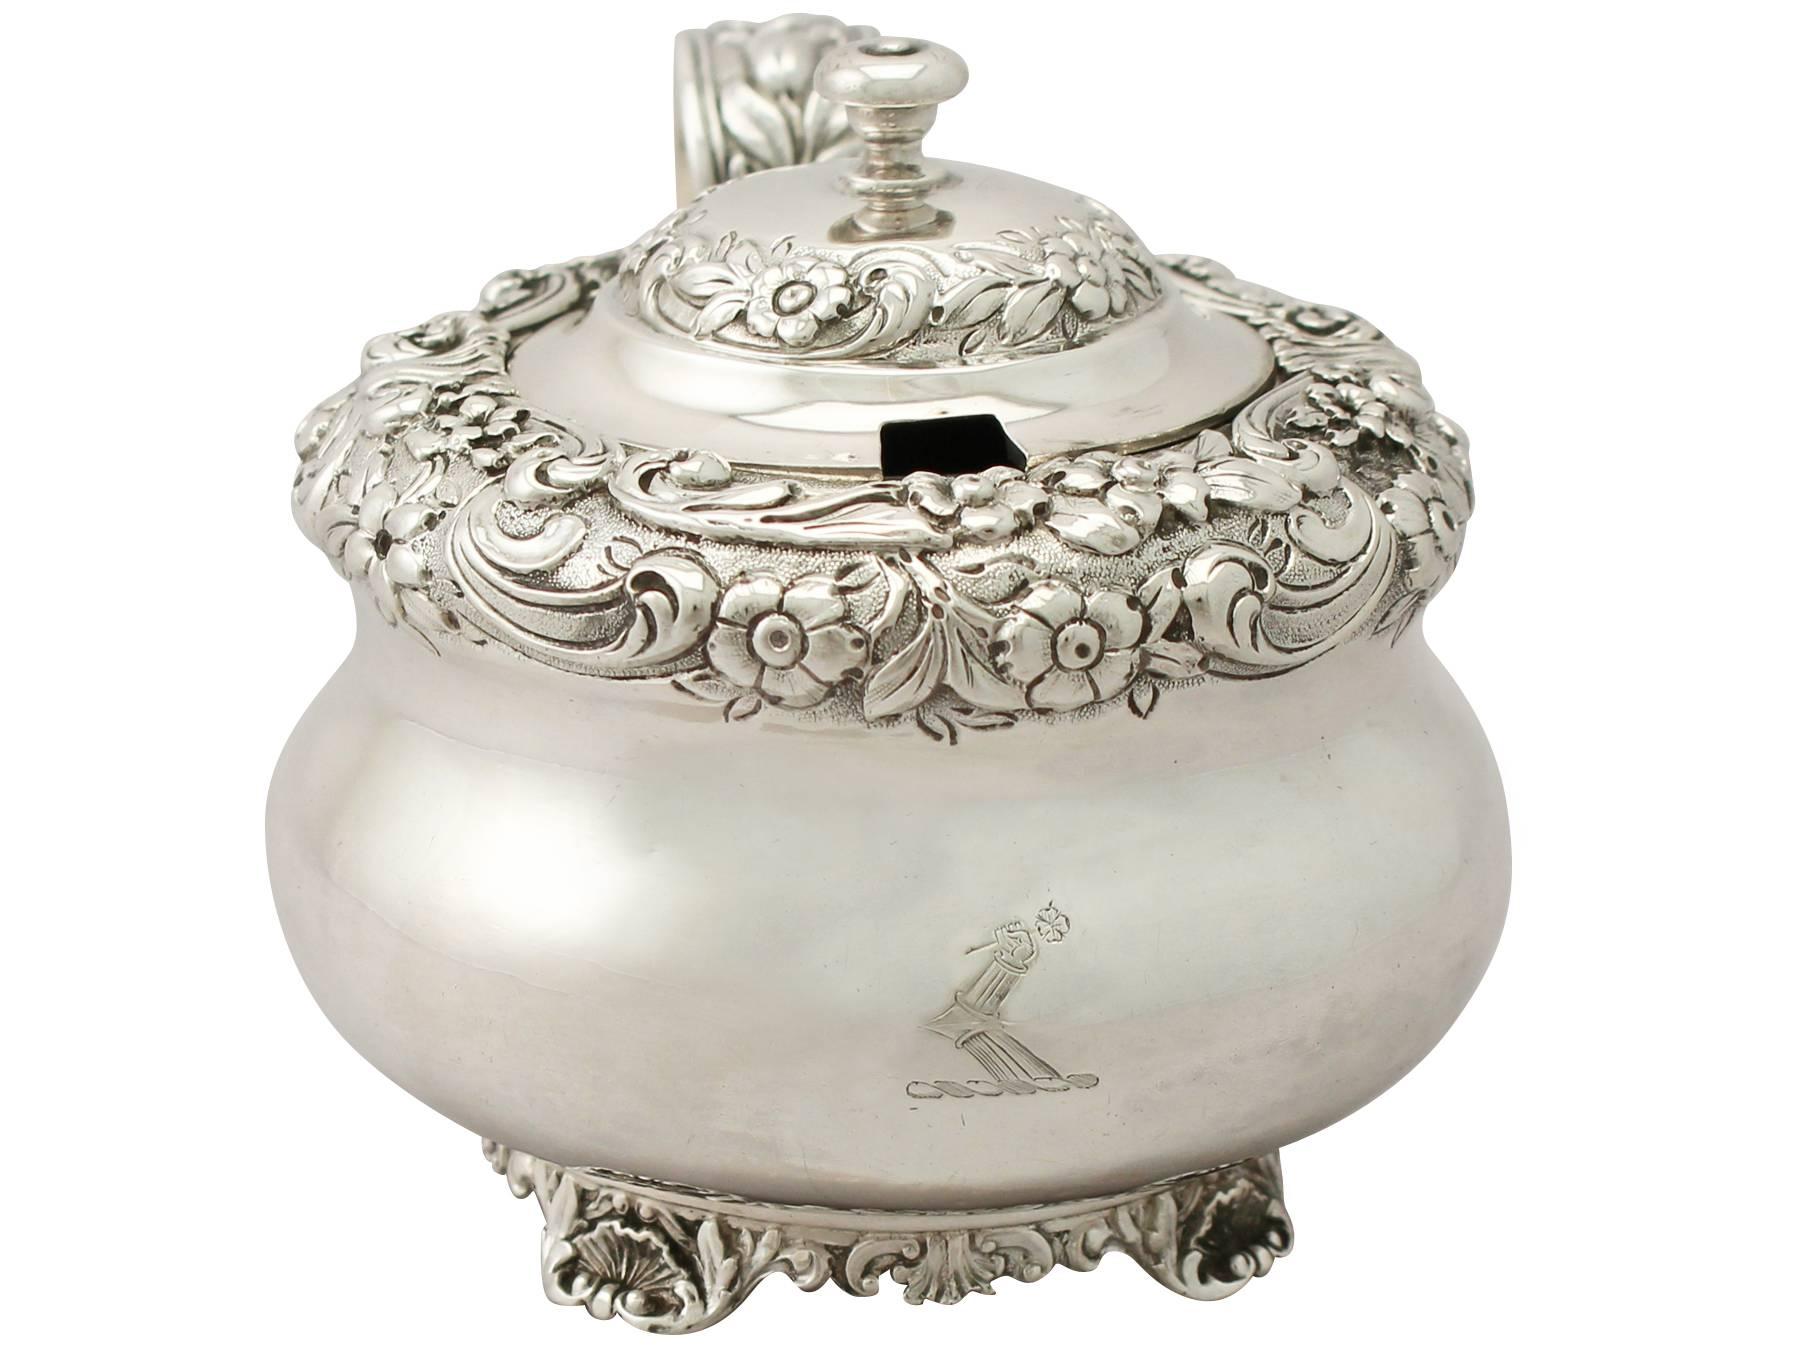 An exceptional, fine and impressive, large antique George IV English sterling silver mustard pot made by William Bateman II; an addition to our George IV silver condiments collection.

This exceptional antique George IV sterling silver mustard pot